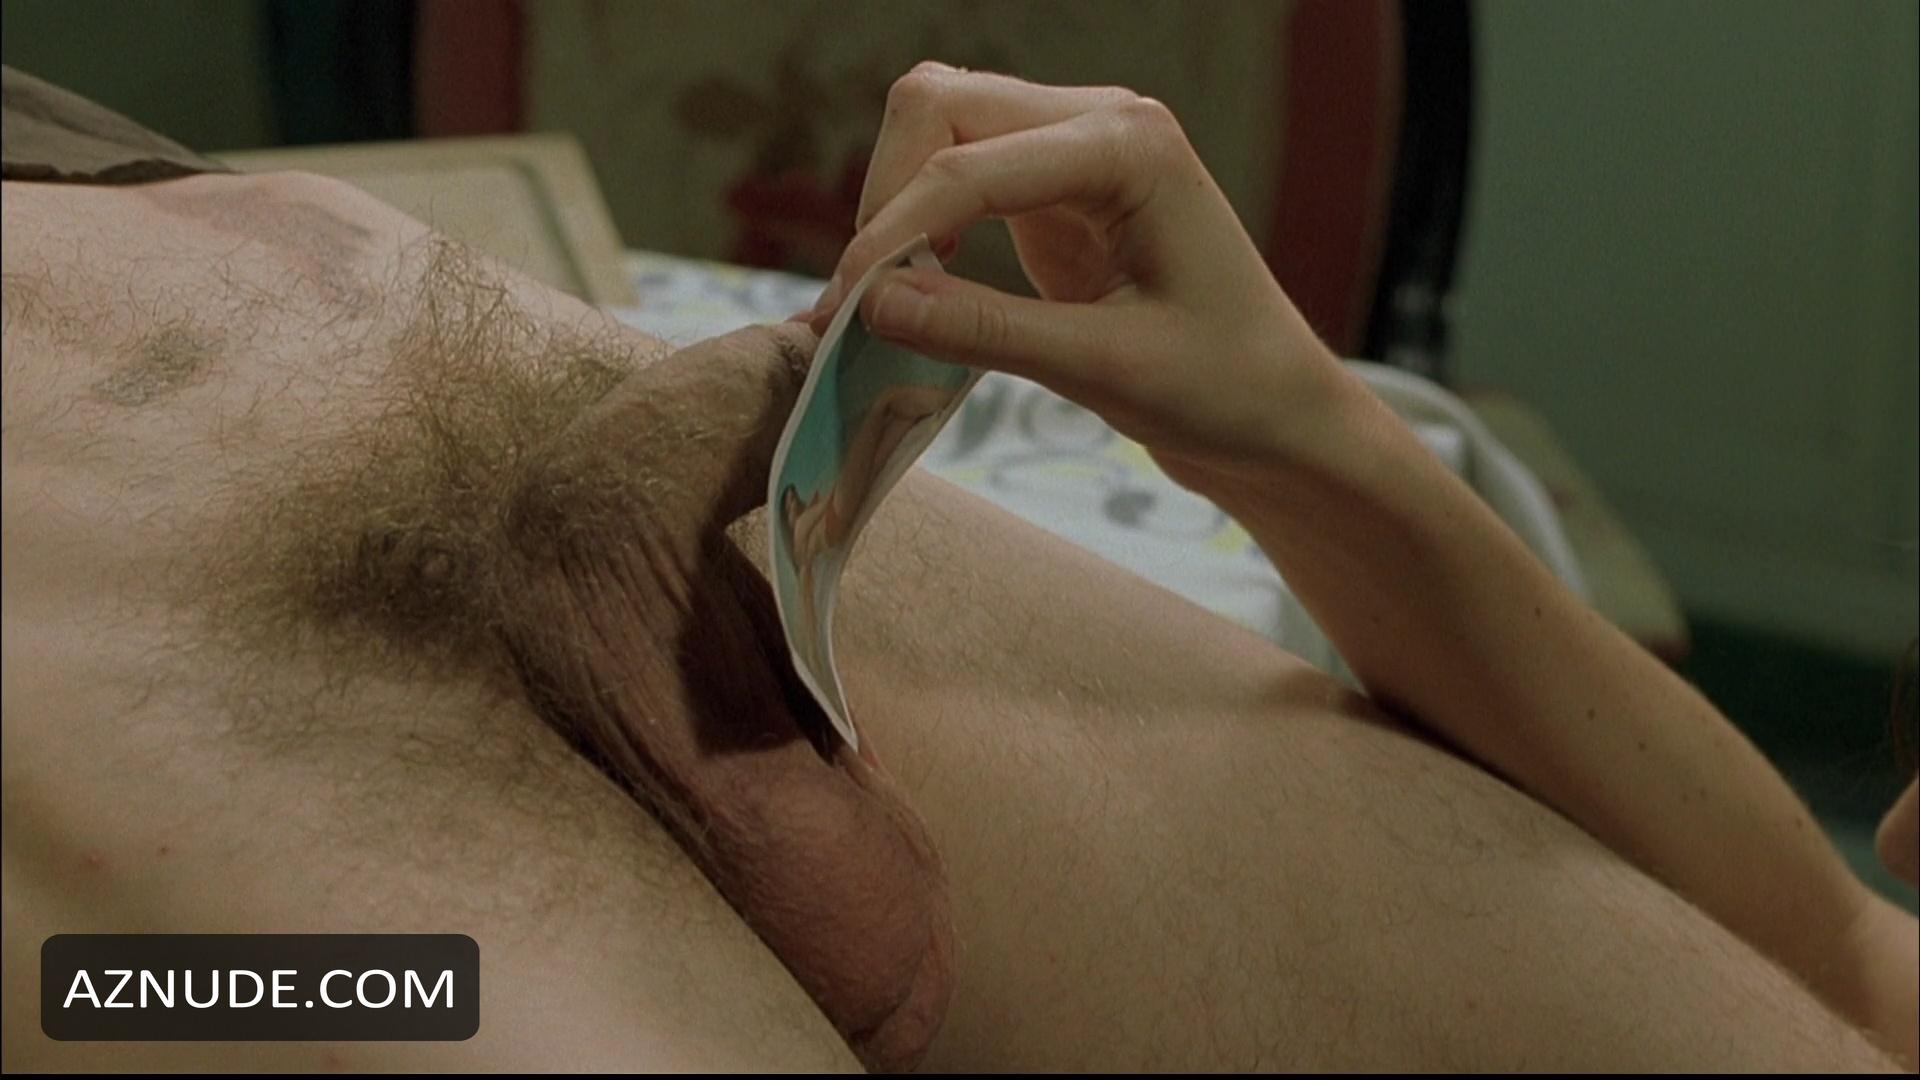 Sex scene from the dreamers